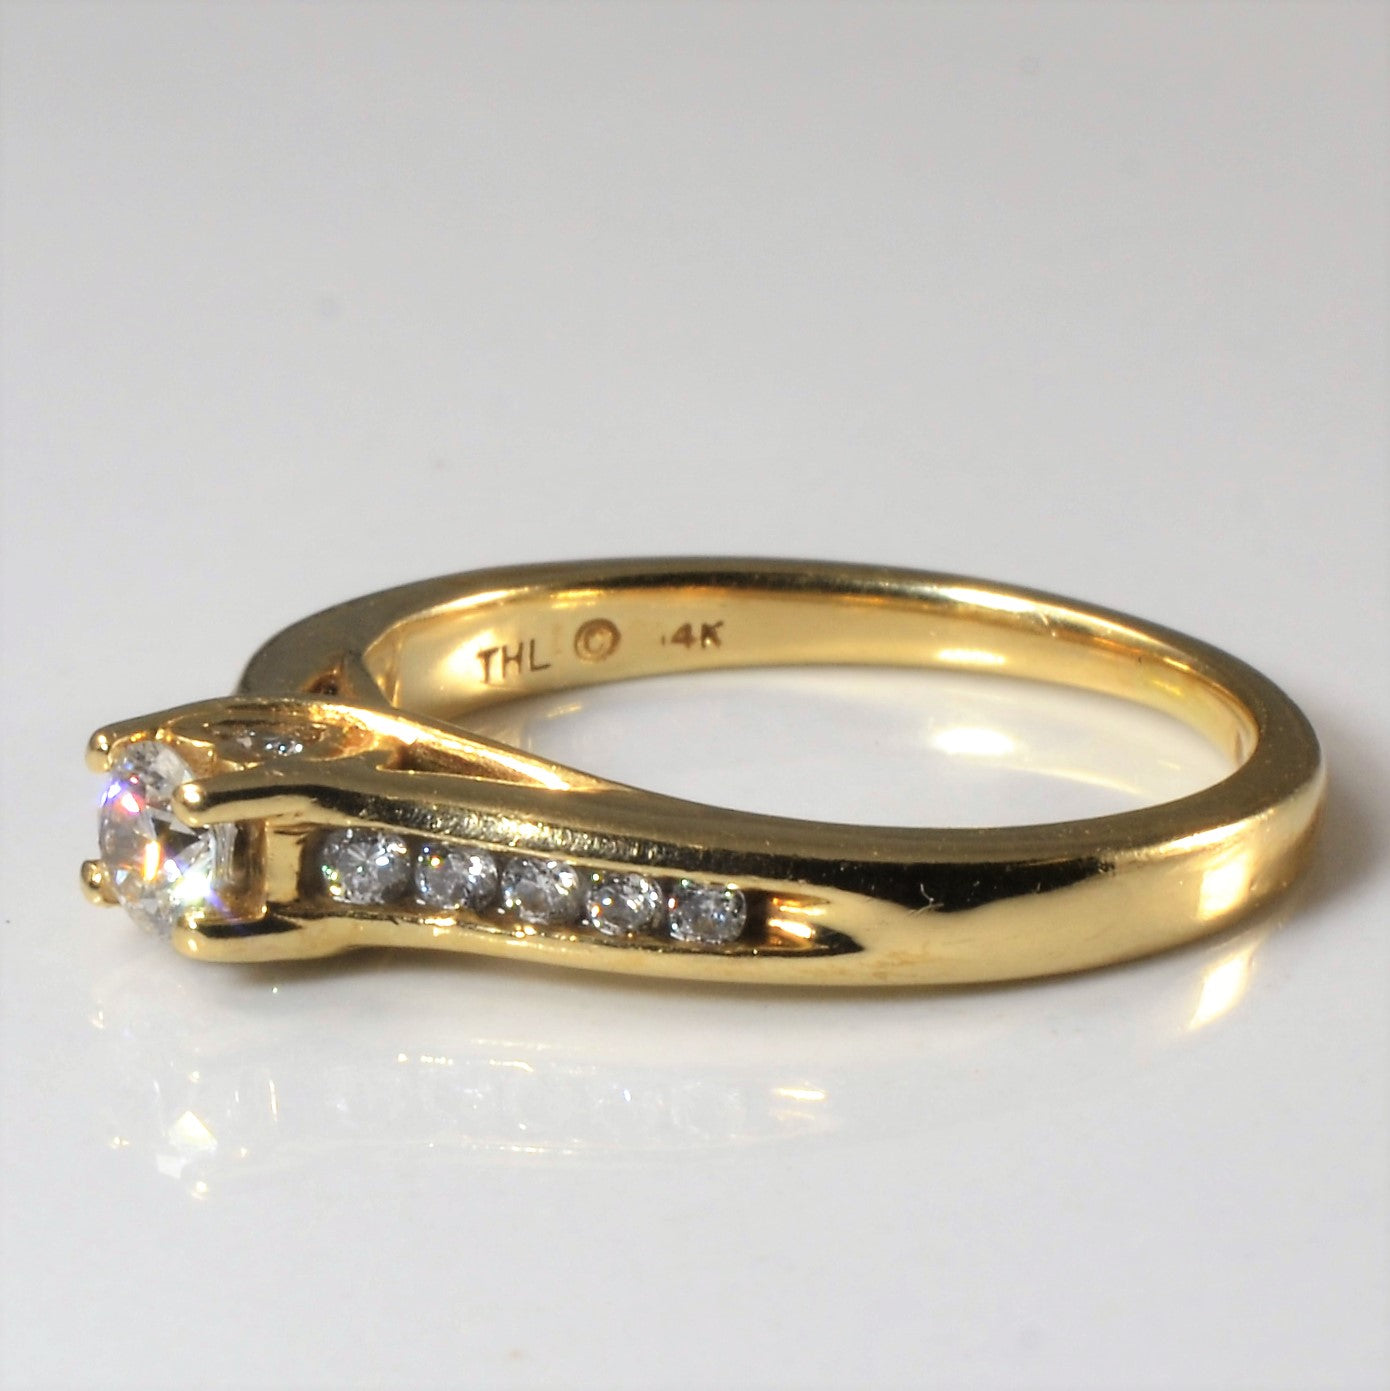 Channel Detailed Diamond Engagement Ring | 0.28ctw | SZ 6 |